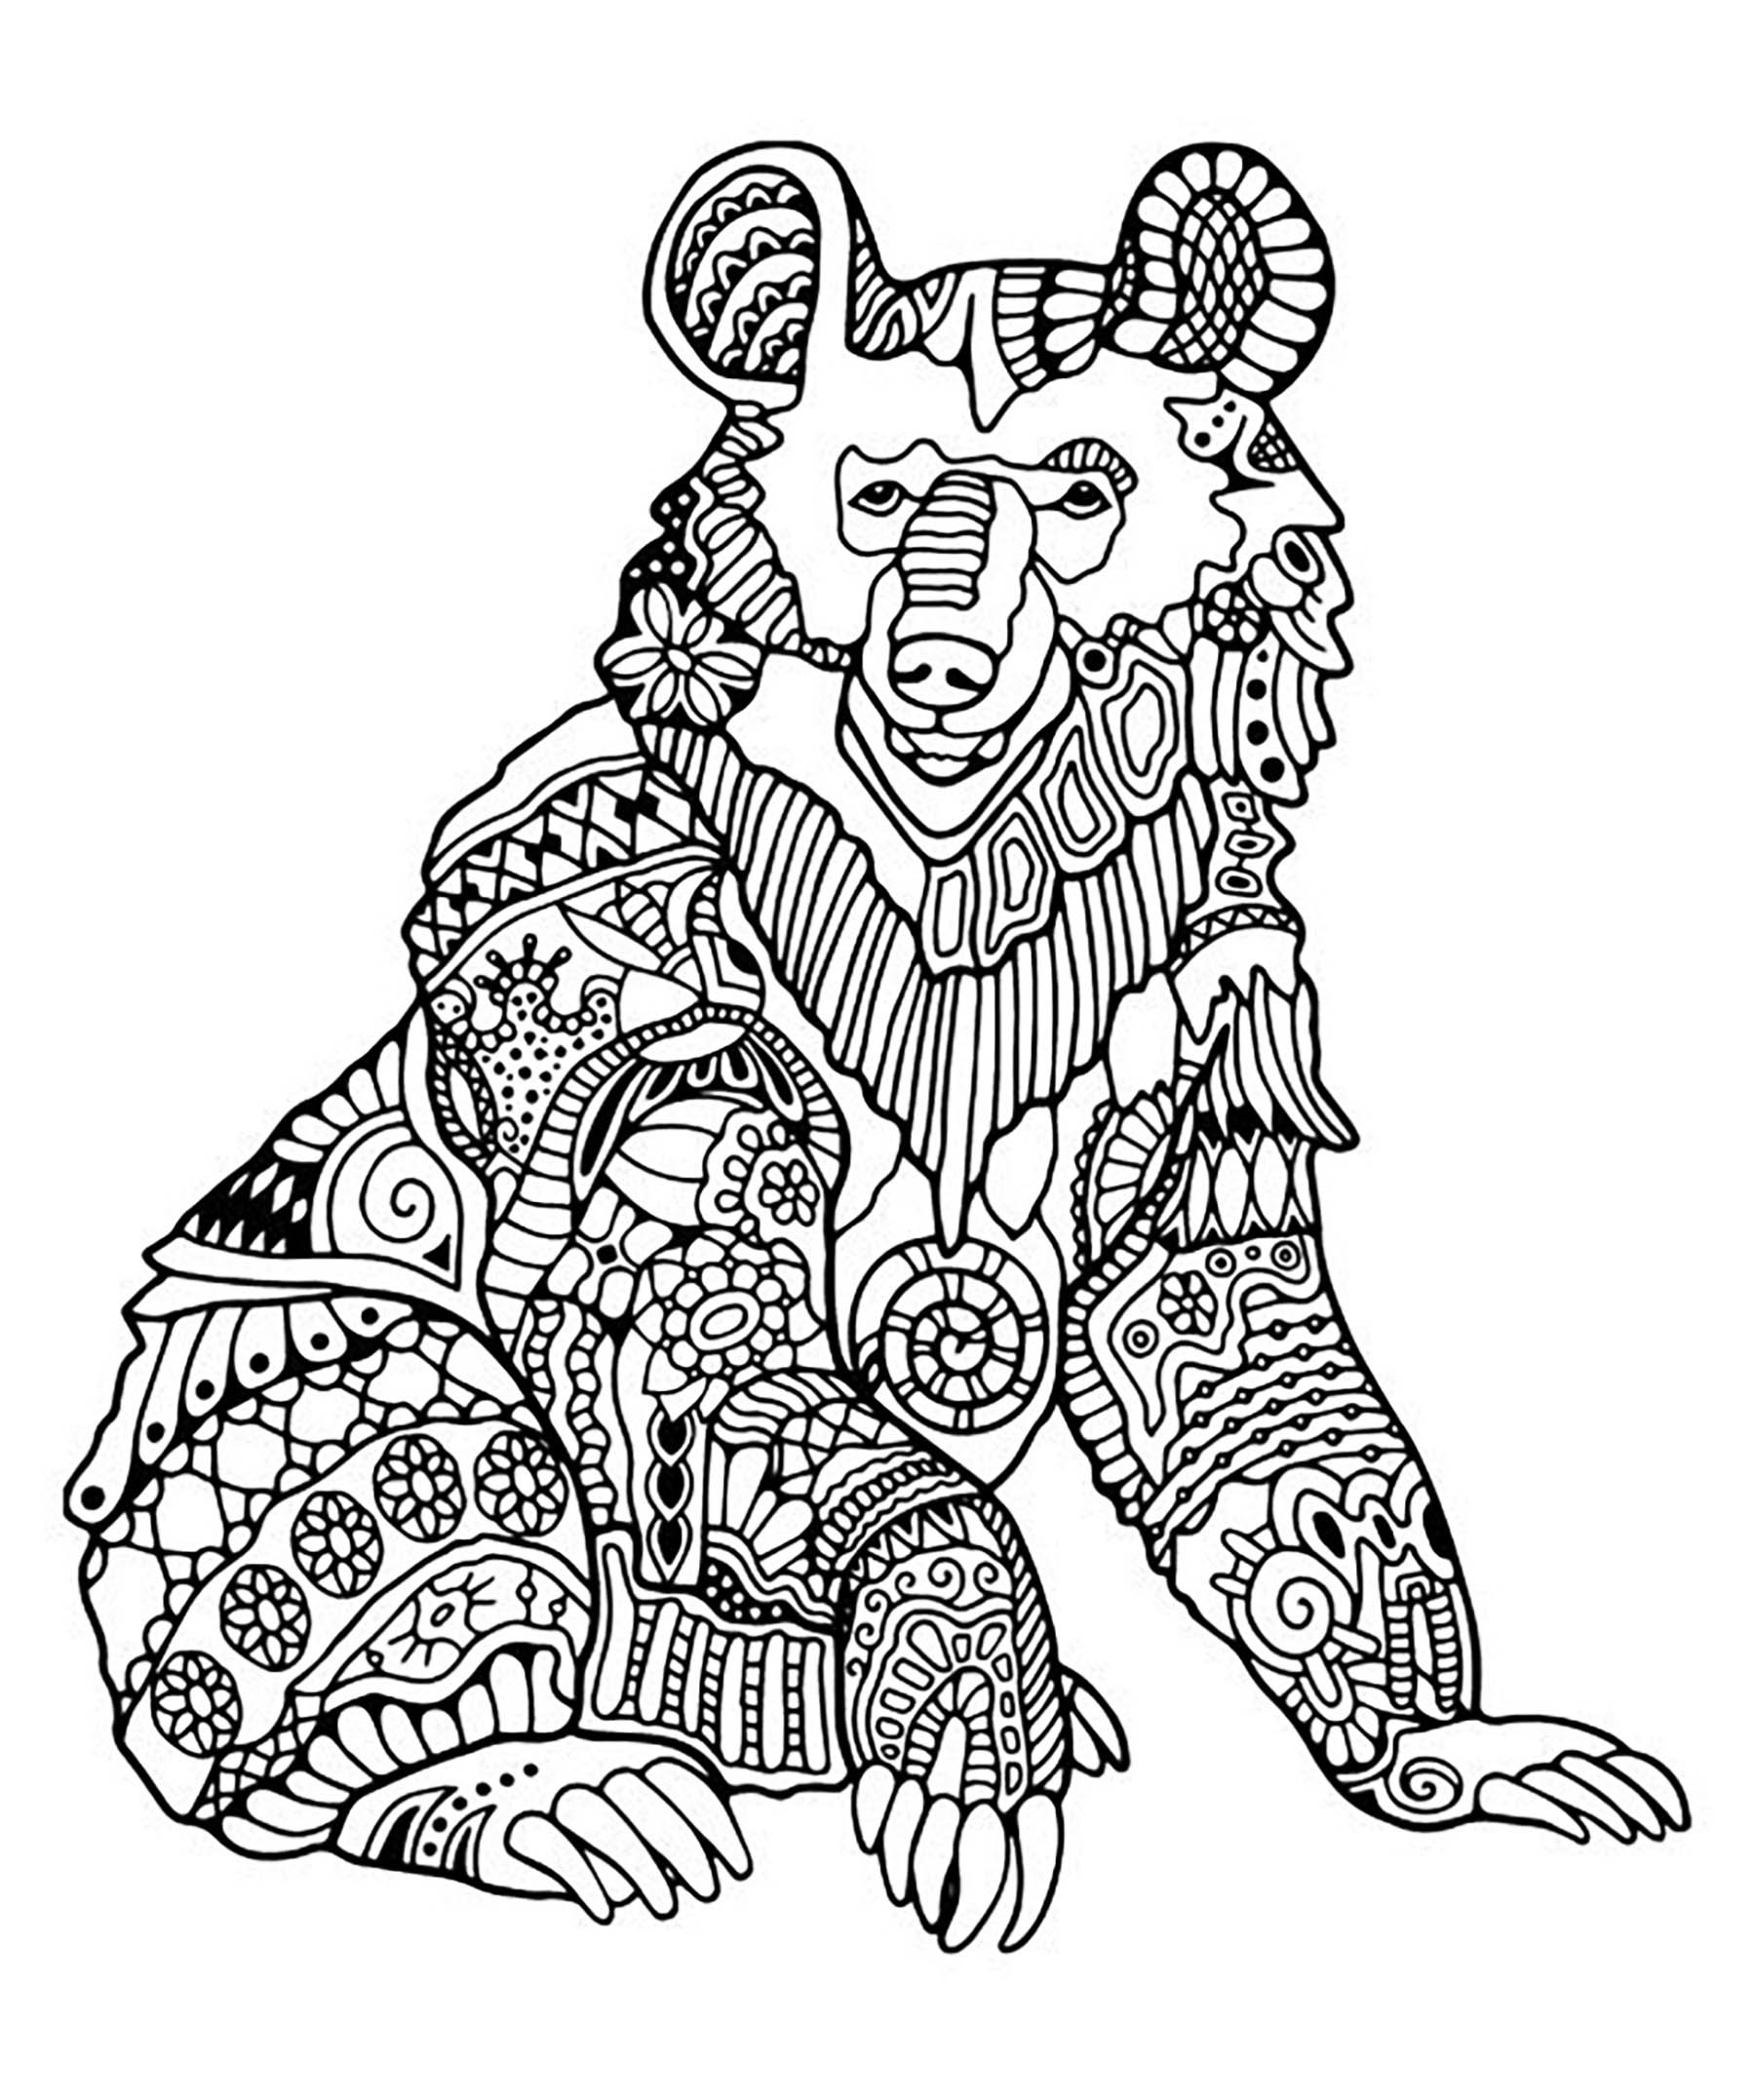 Bear 1 - Bears Adult Coloring Pages